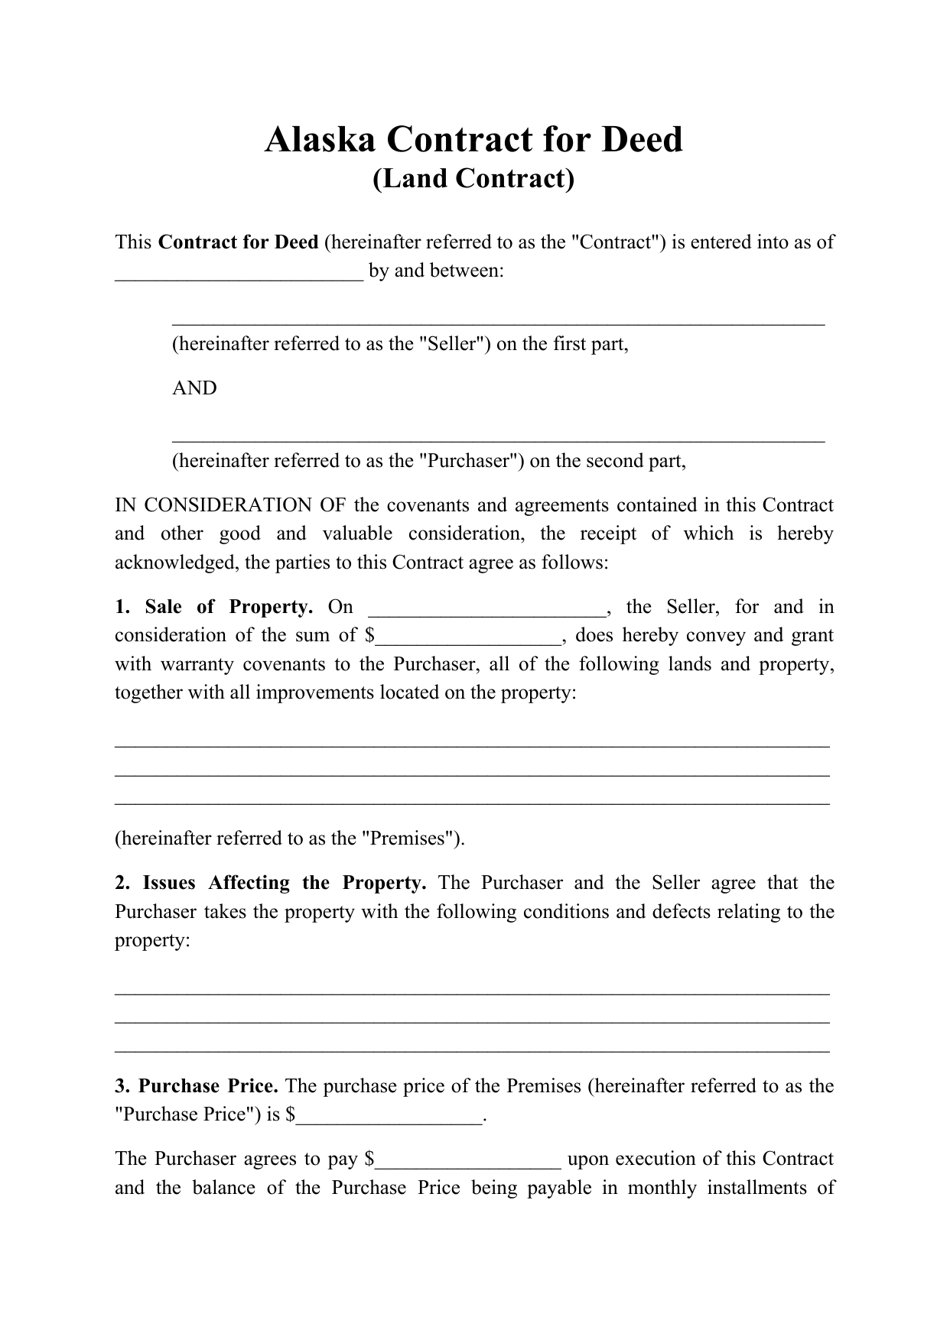 Contract for Deed (Land Contract) - Alaska, Page 1